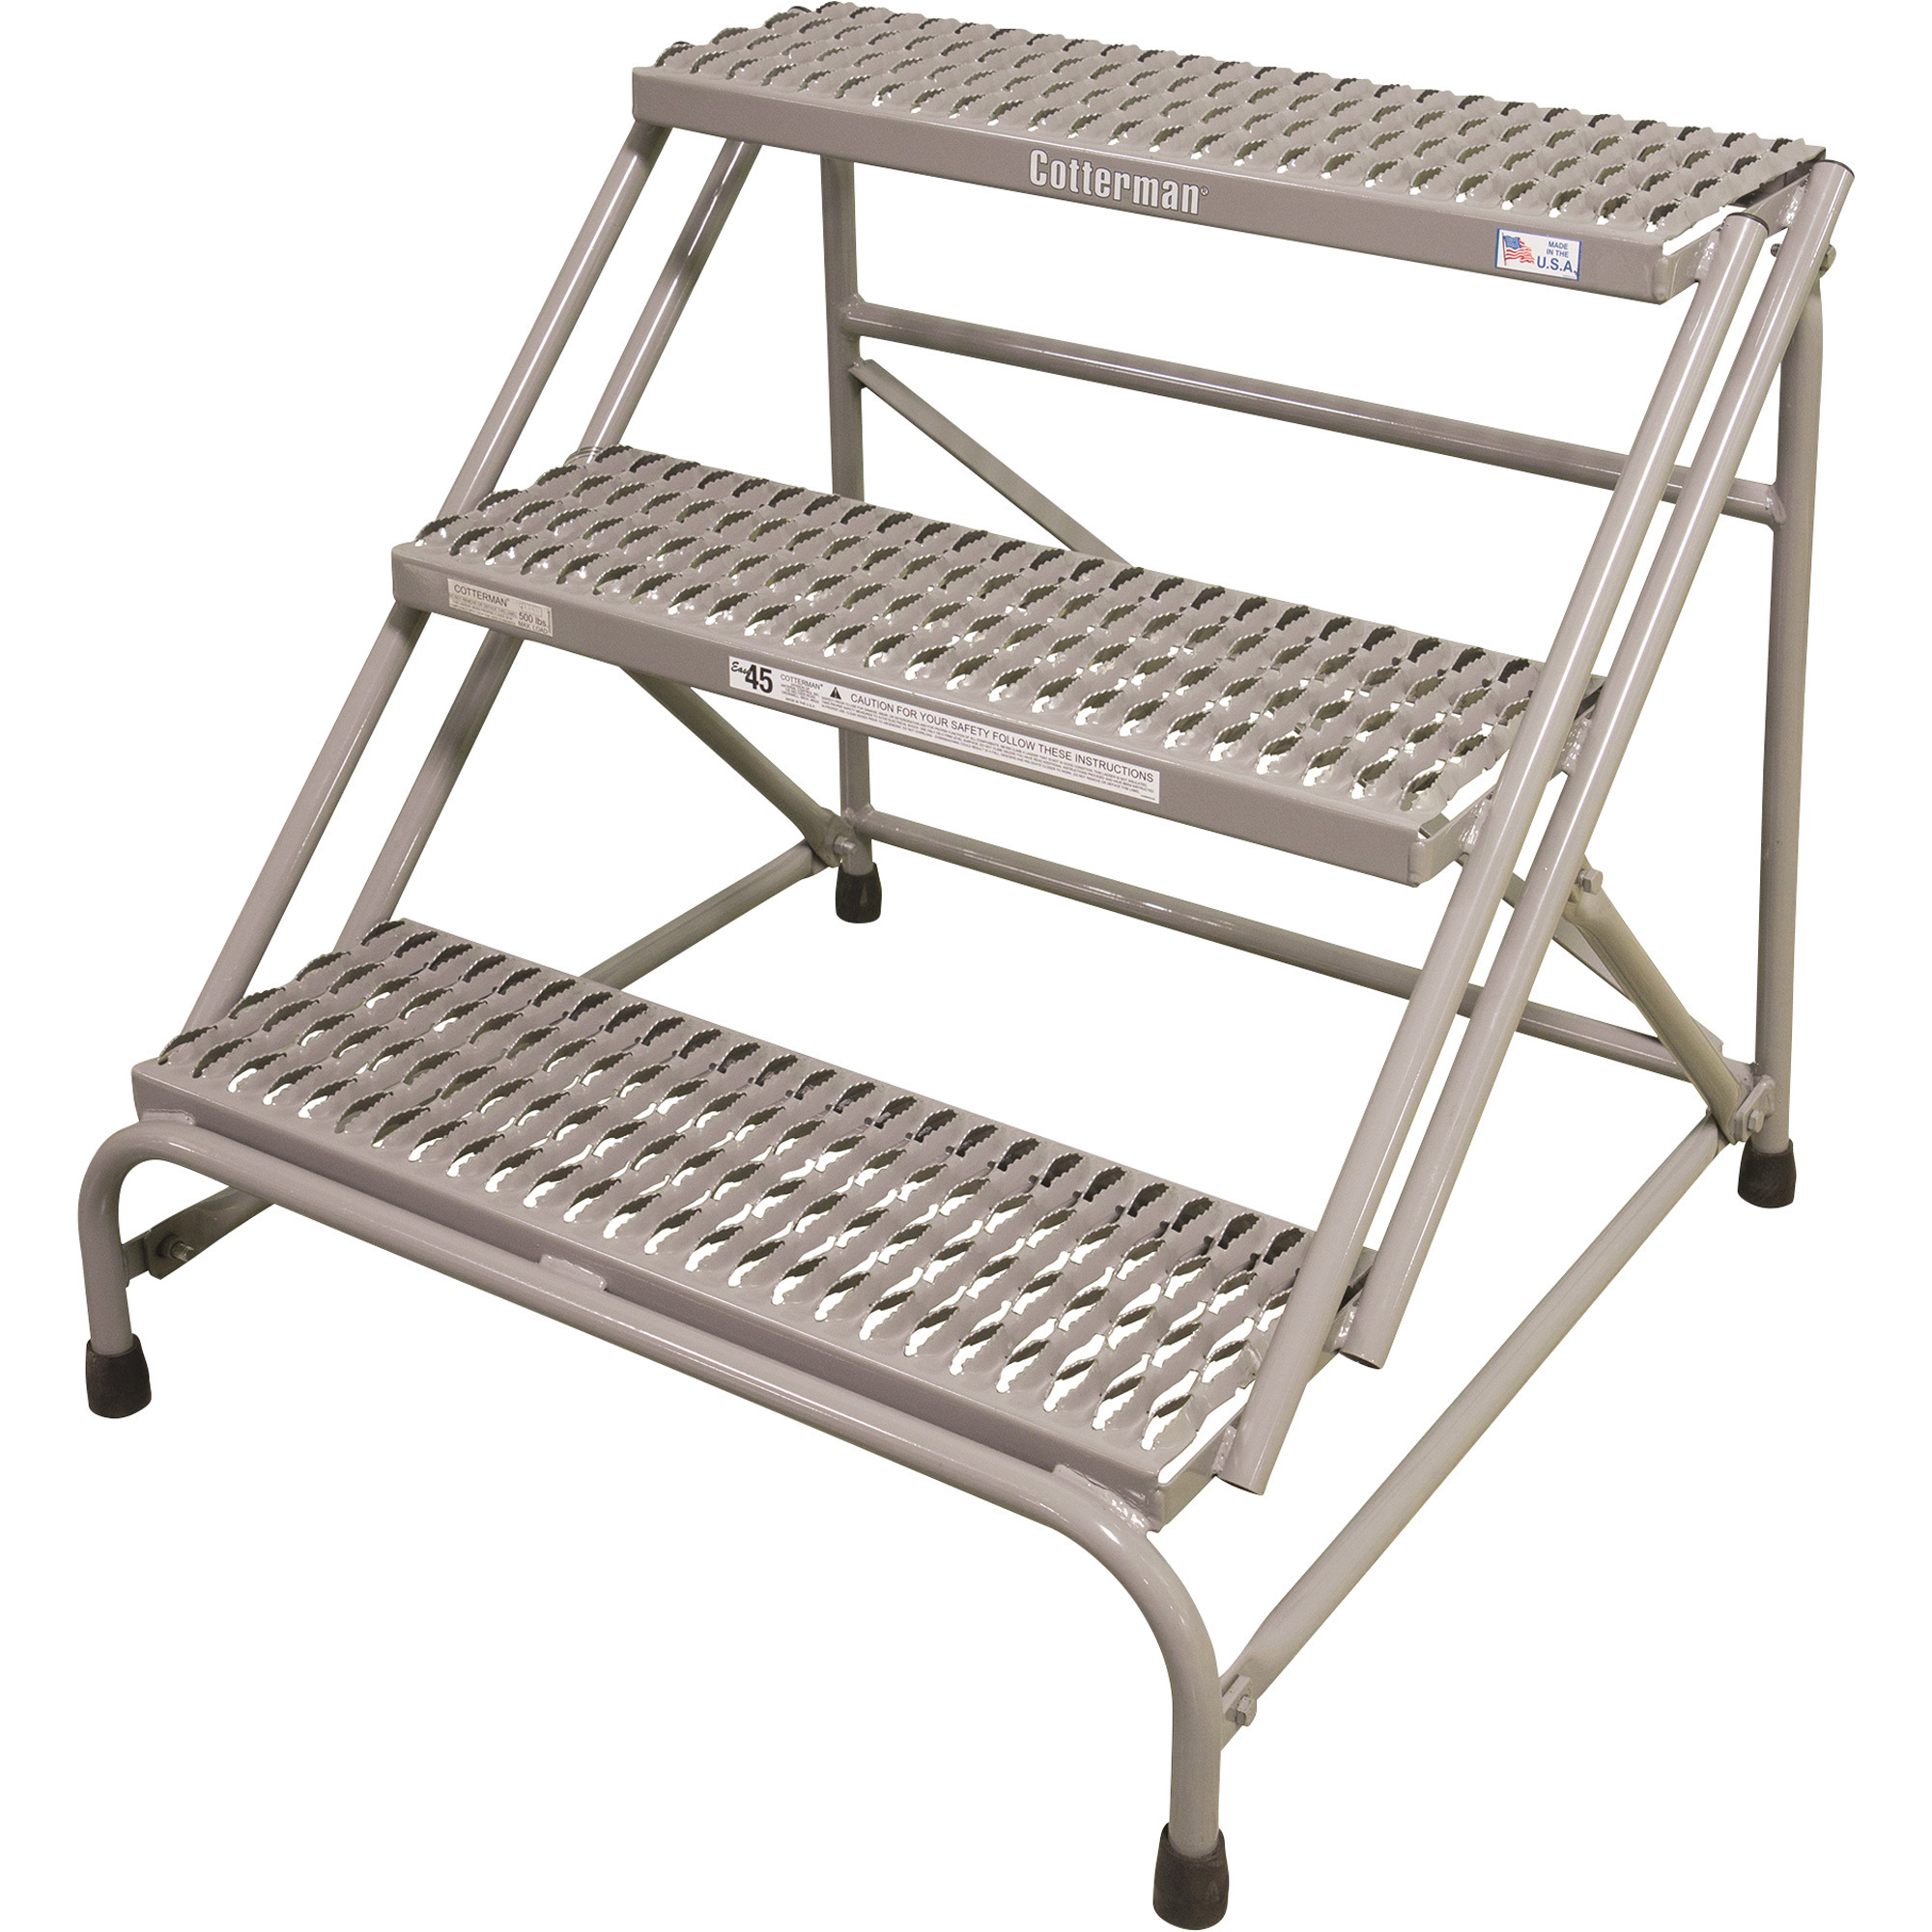 Cotterman Steel Step Stand — 3 Steps, 500-Lb. Capacity, 30in.H